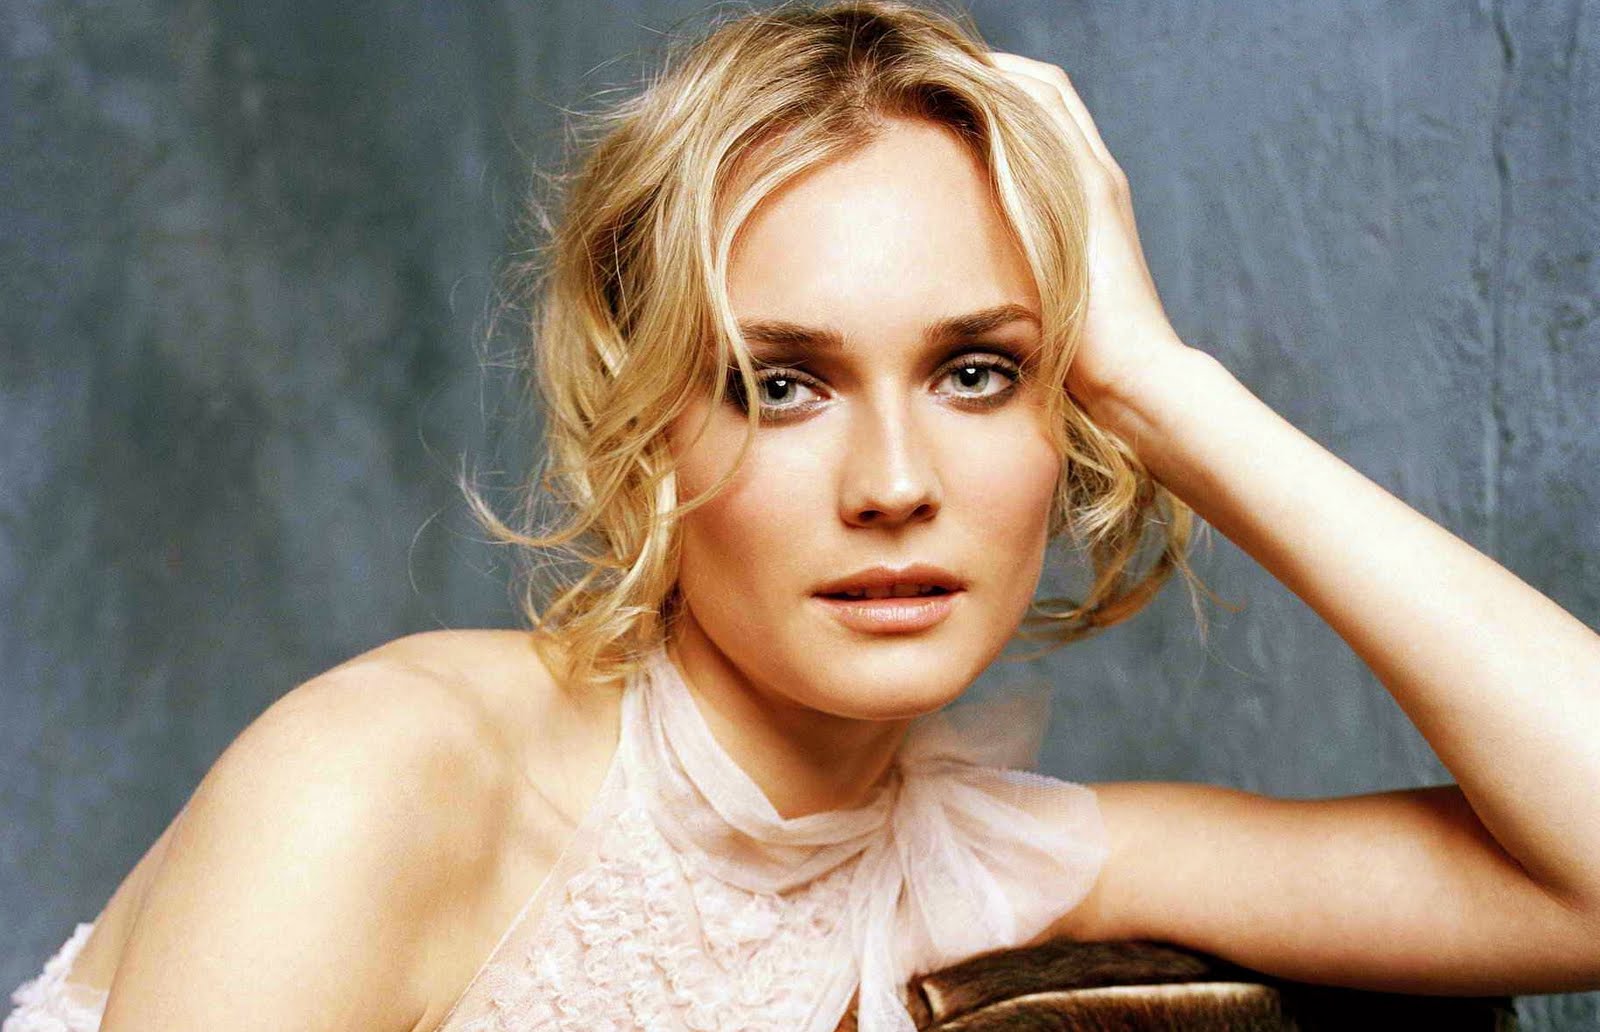 Hot Bikini Wallpapers: latest Diane kruger Hot Photos pictures,latest ...